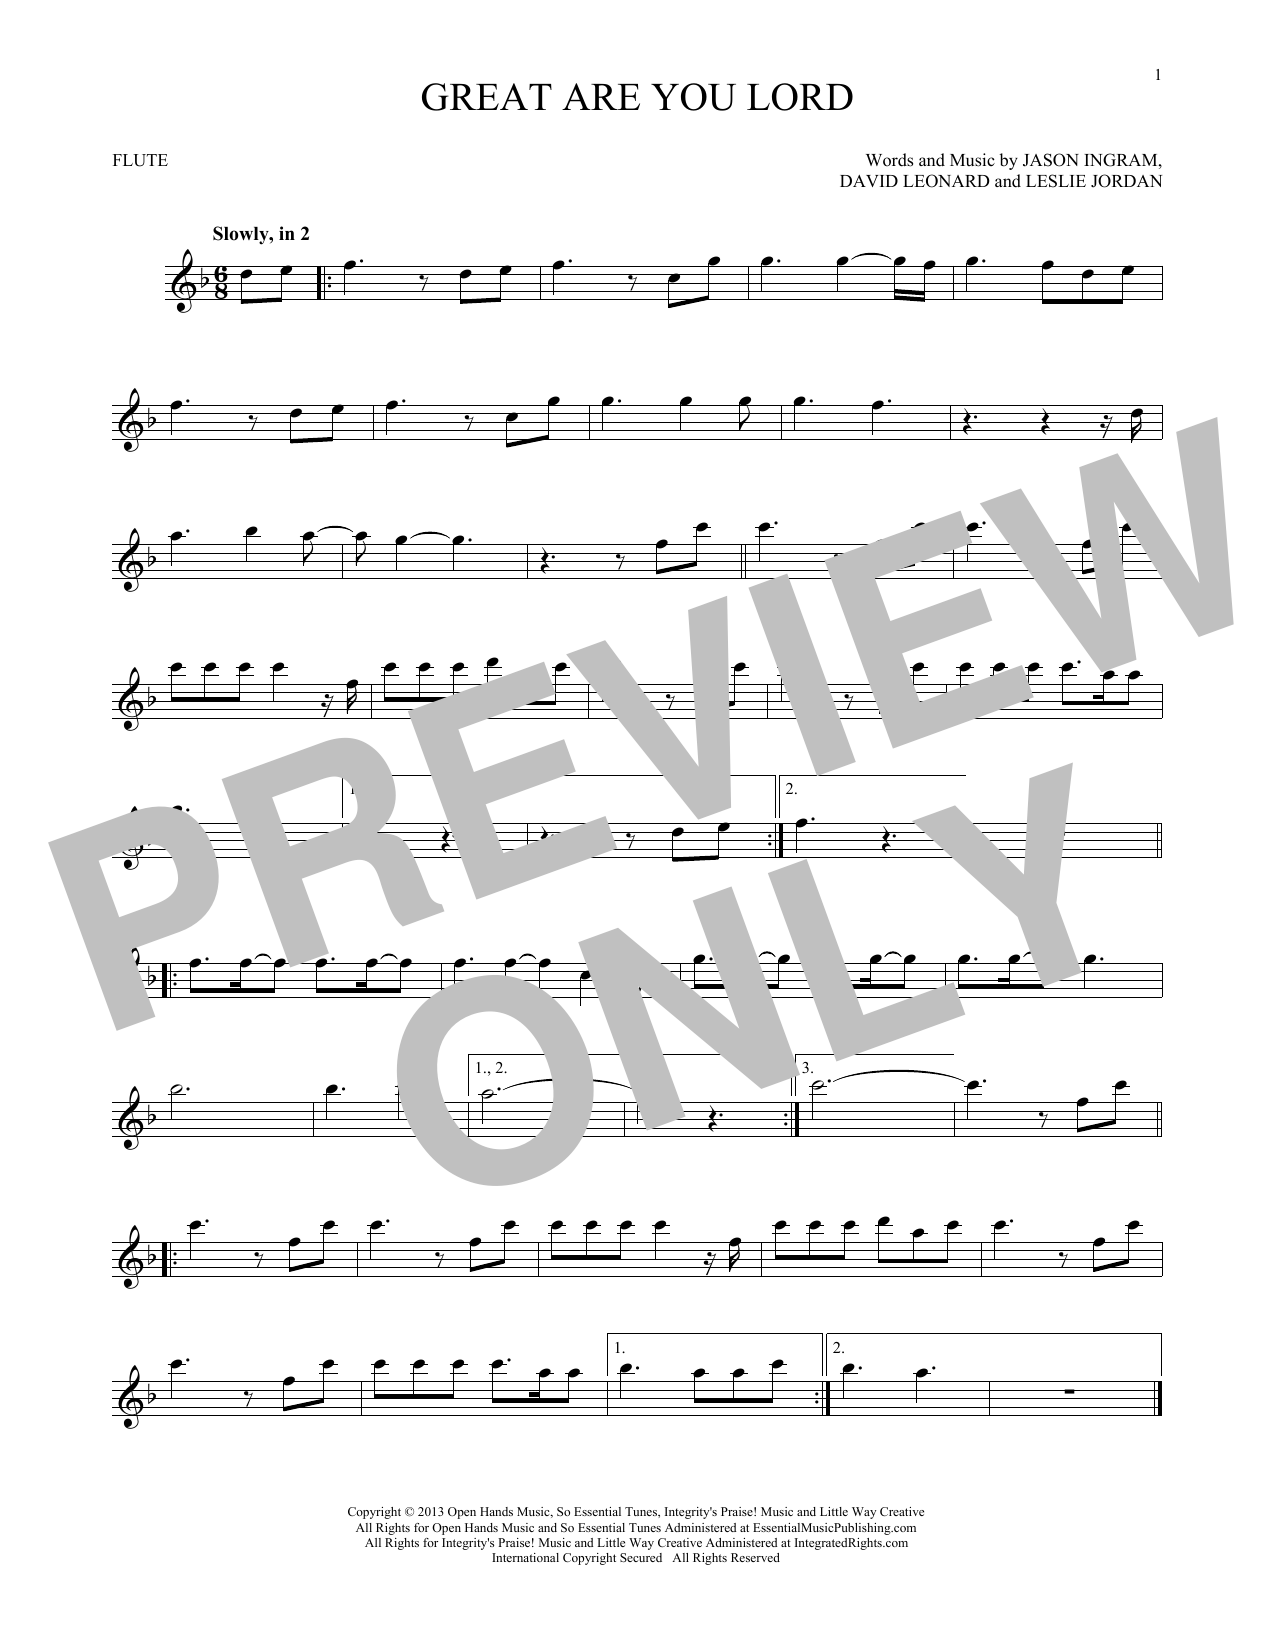 All Sons & Daughters Great Are You Lord sheet music notes printable PDF score